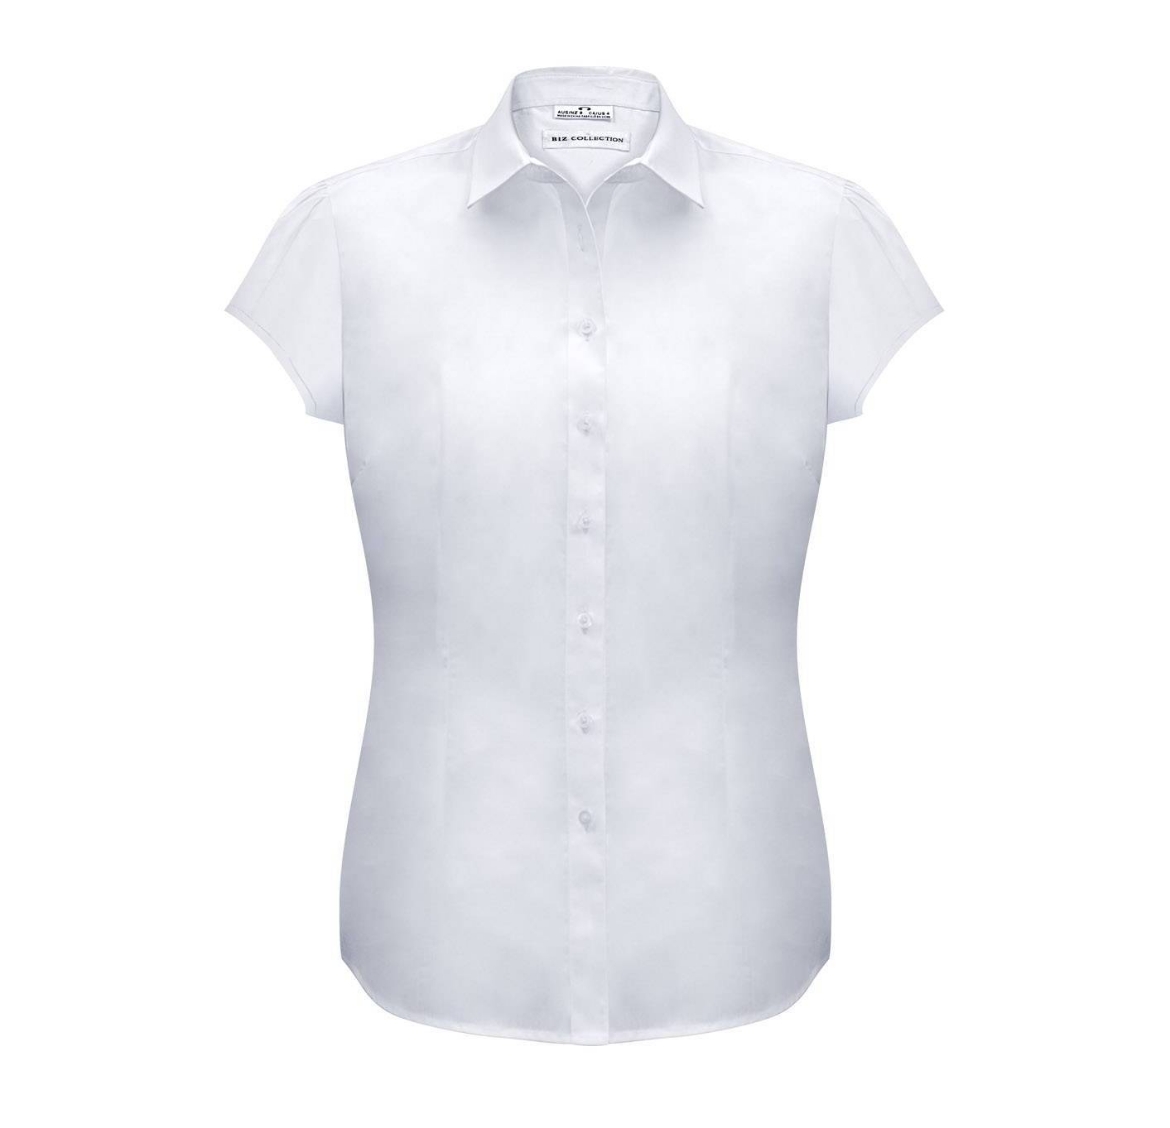 Picture of Biz Collection, Euro Ladies S/S Shirt